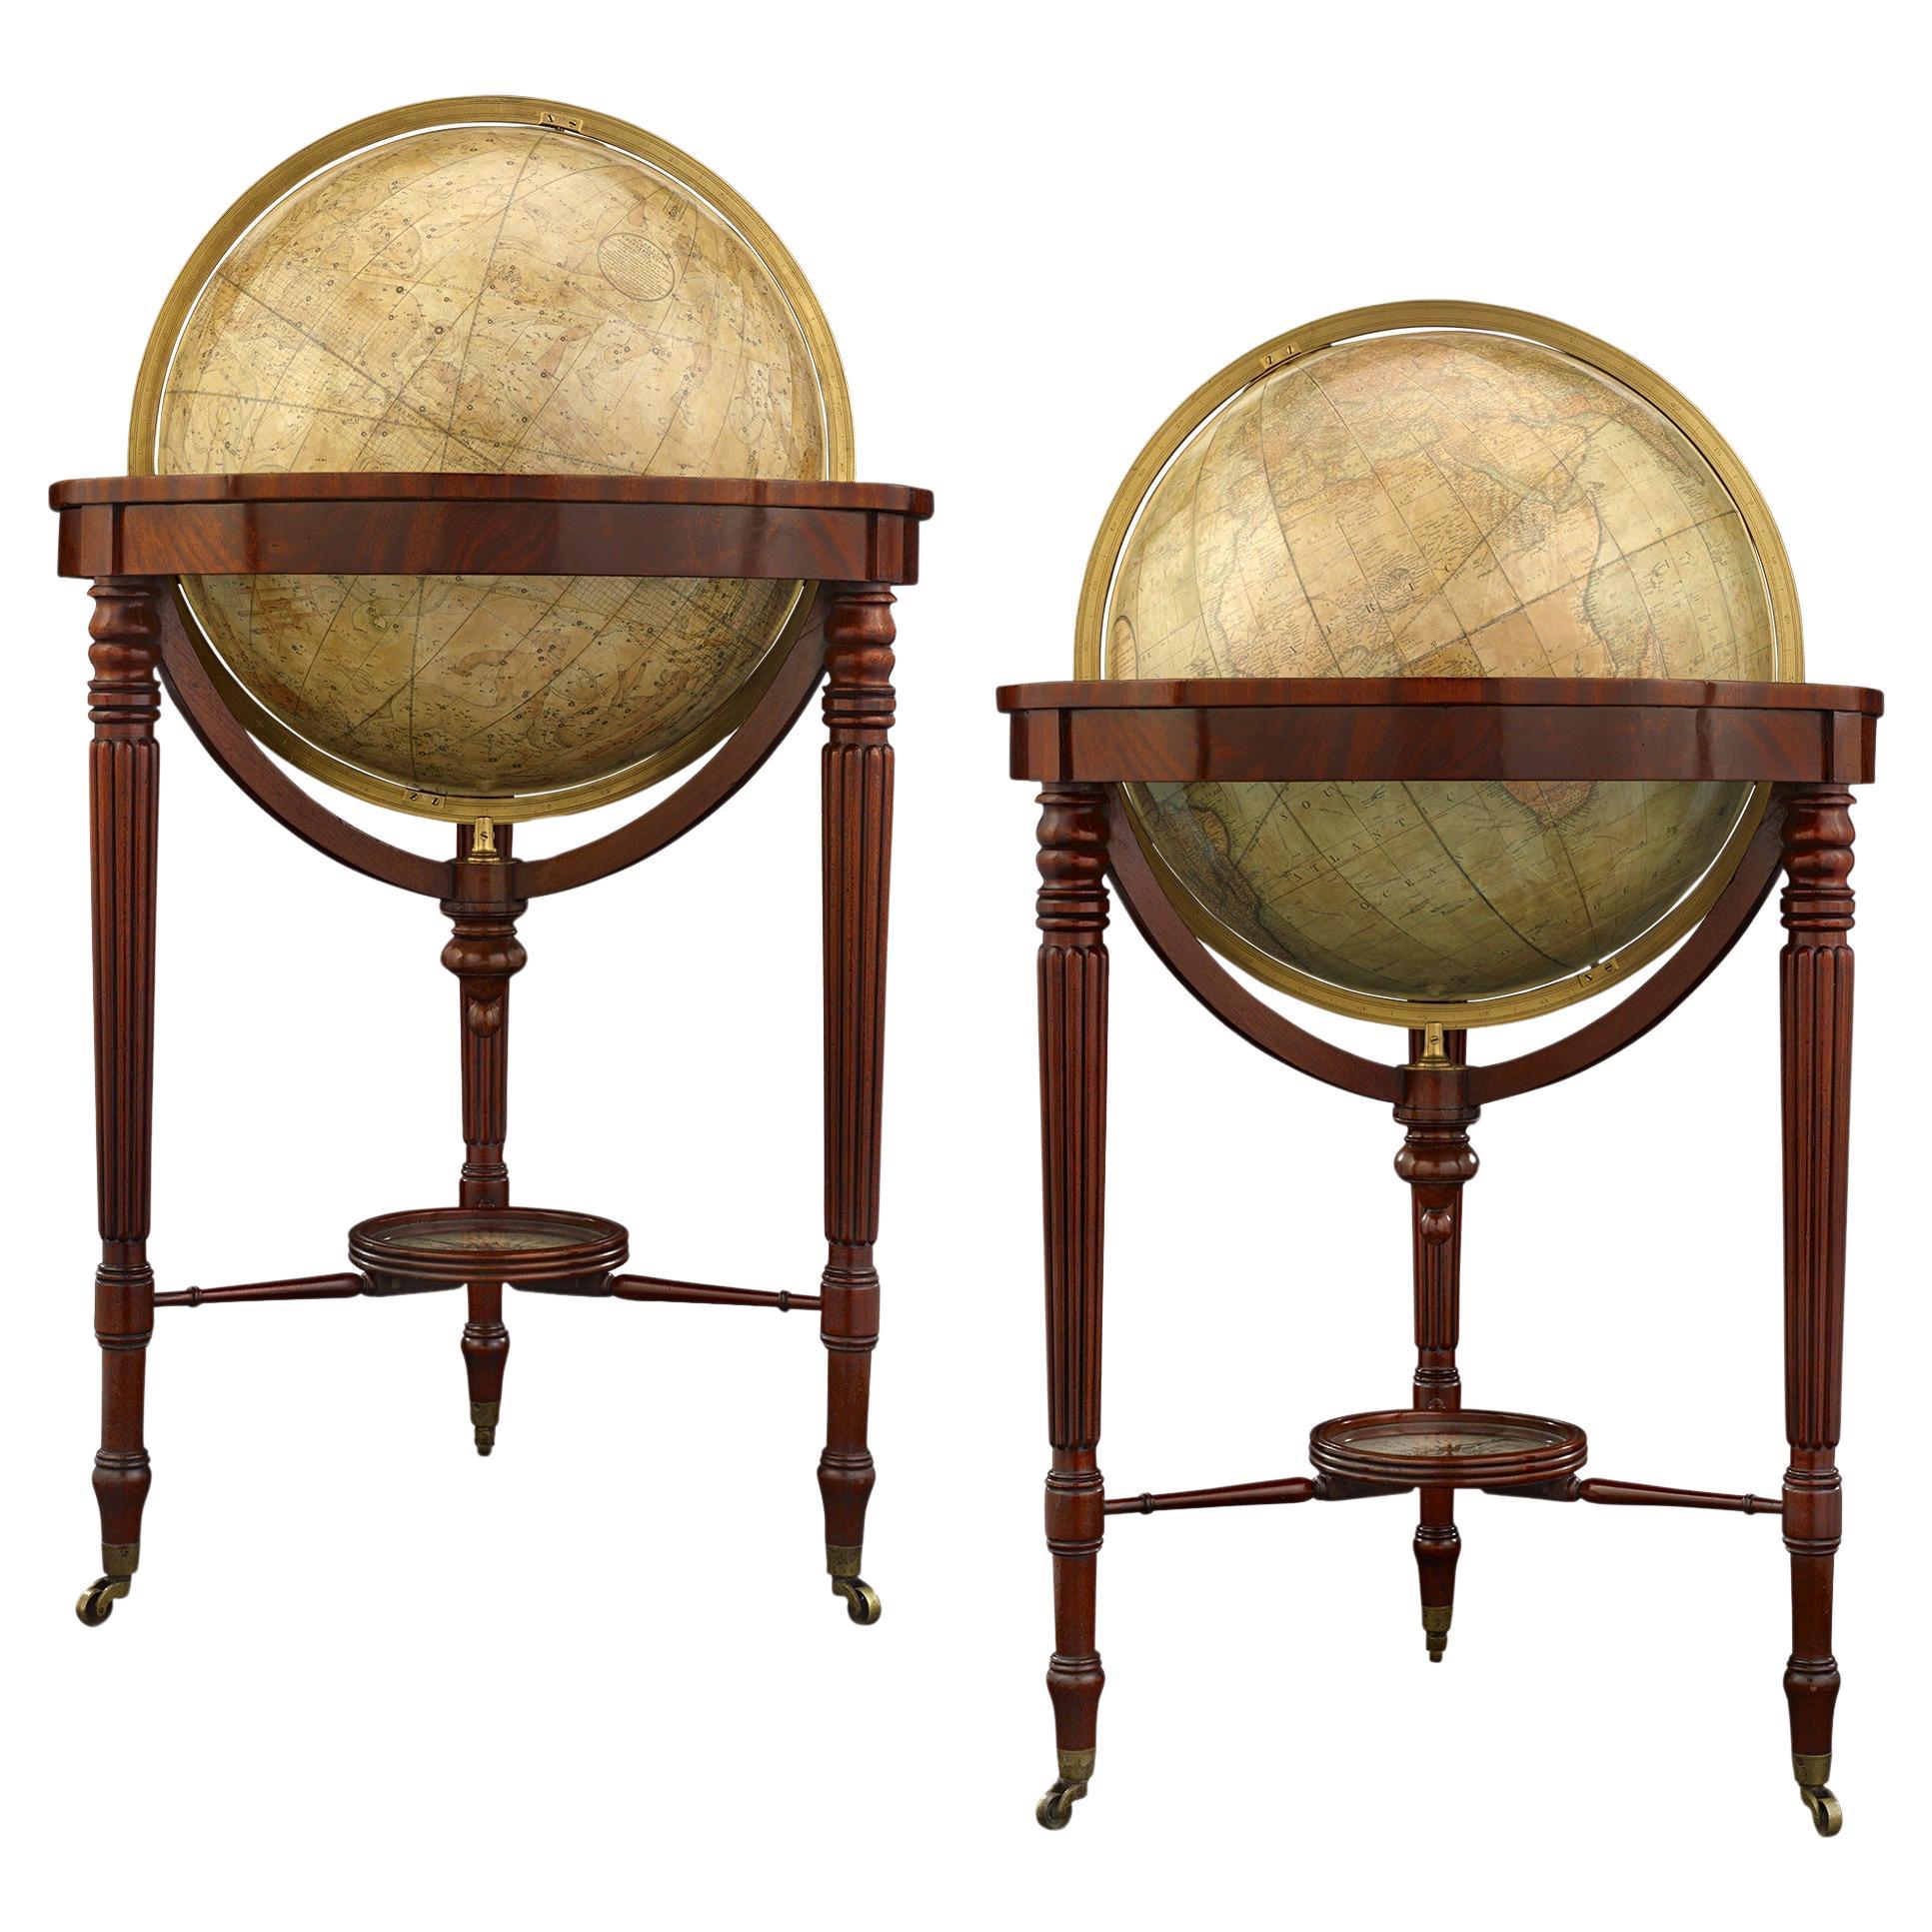 William IV Terrestrial And Celestial Floor Globes By J. W. Cary For Sale